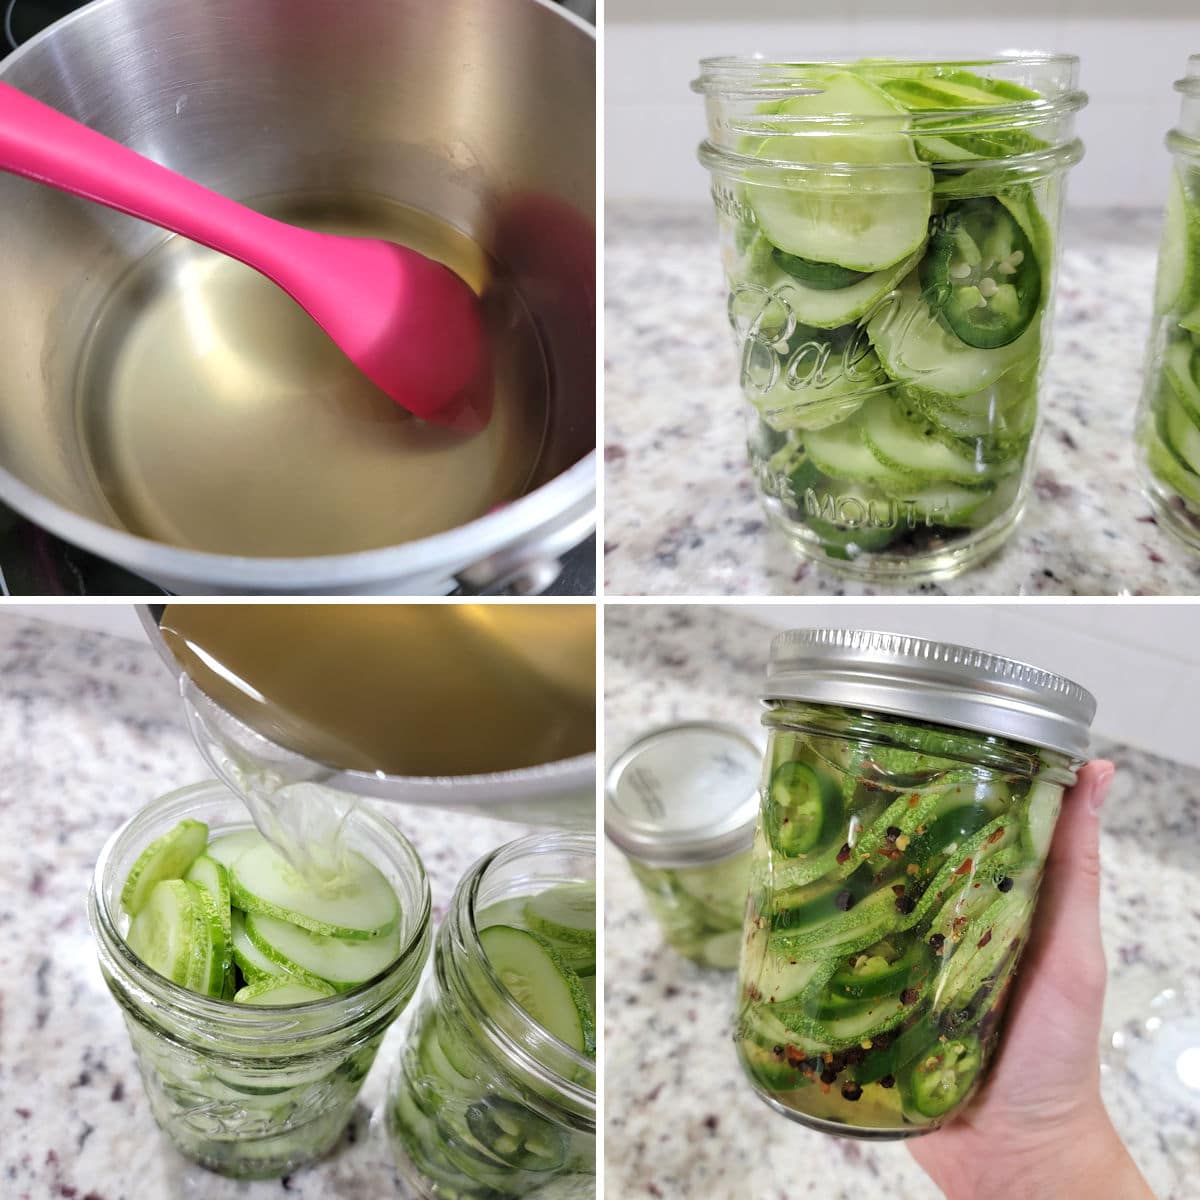 Assembling sweet and spicy pickles in a glass jar.